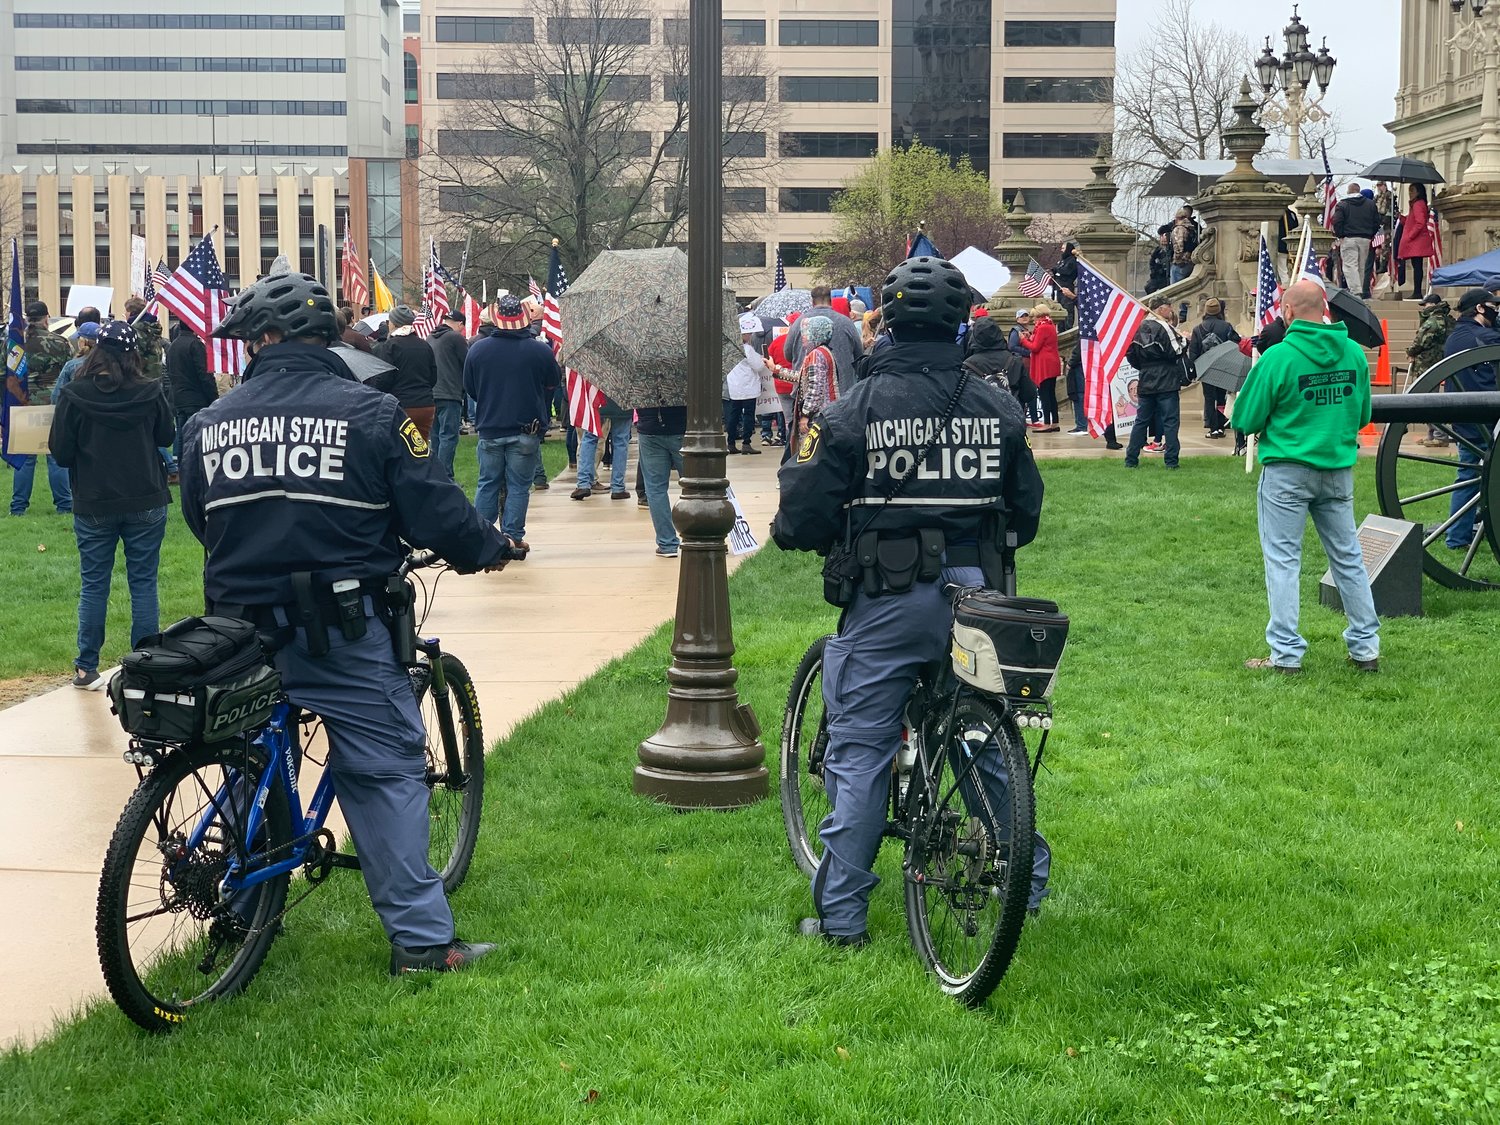 Michigan State Police report only one arrest at yesterday's protest against Gov. Gretchen Whitmer's lockdown orders.